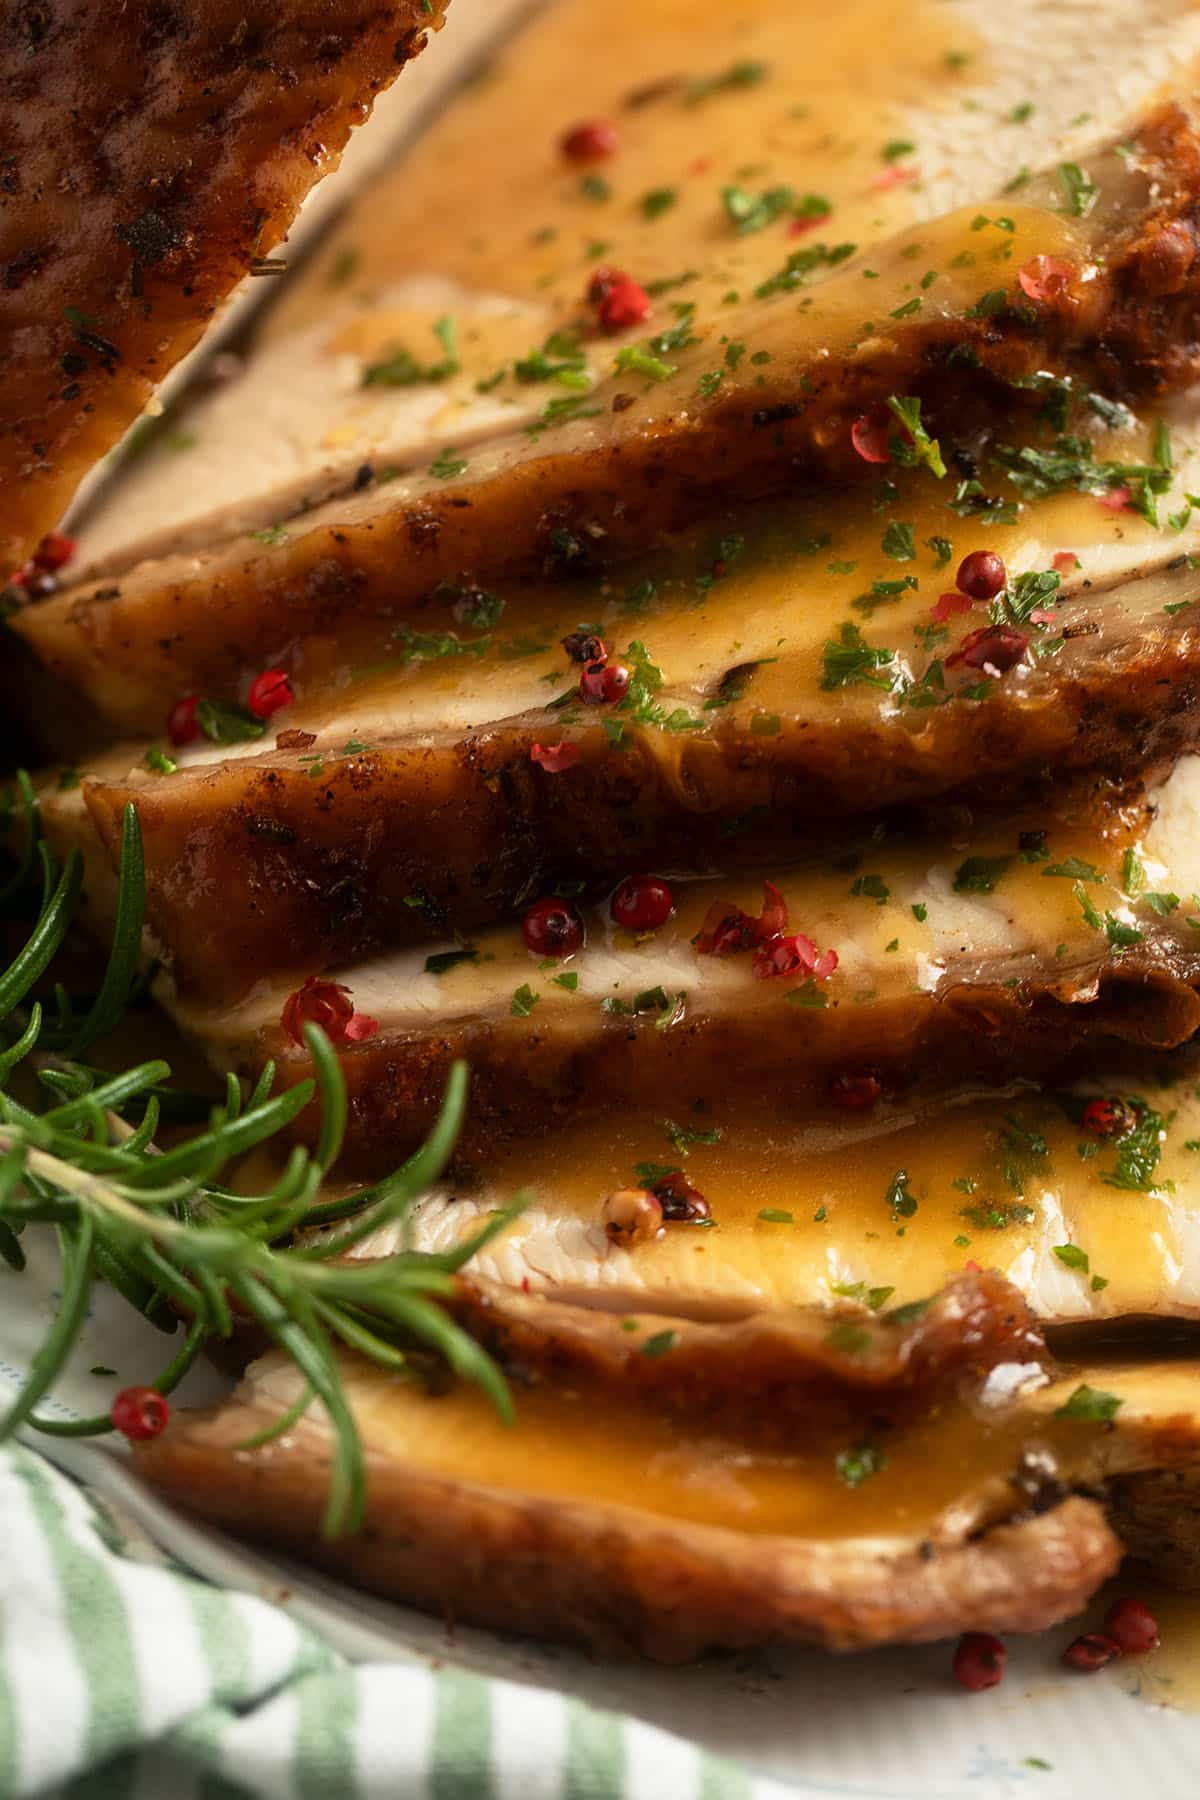 close up slices of turkey breast slathered with gravy.